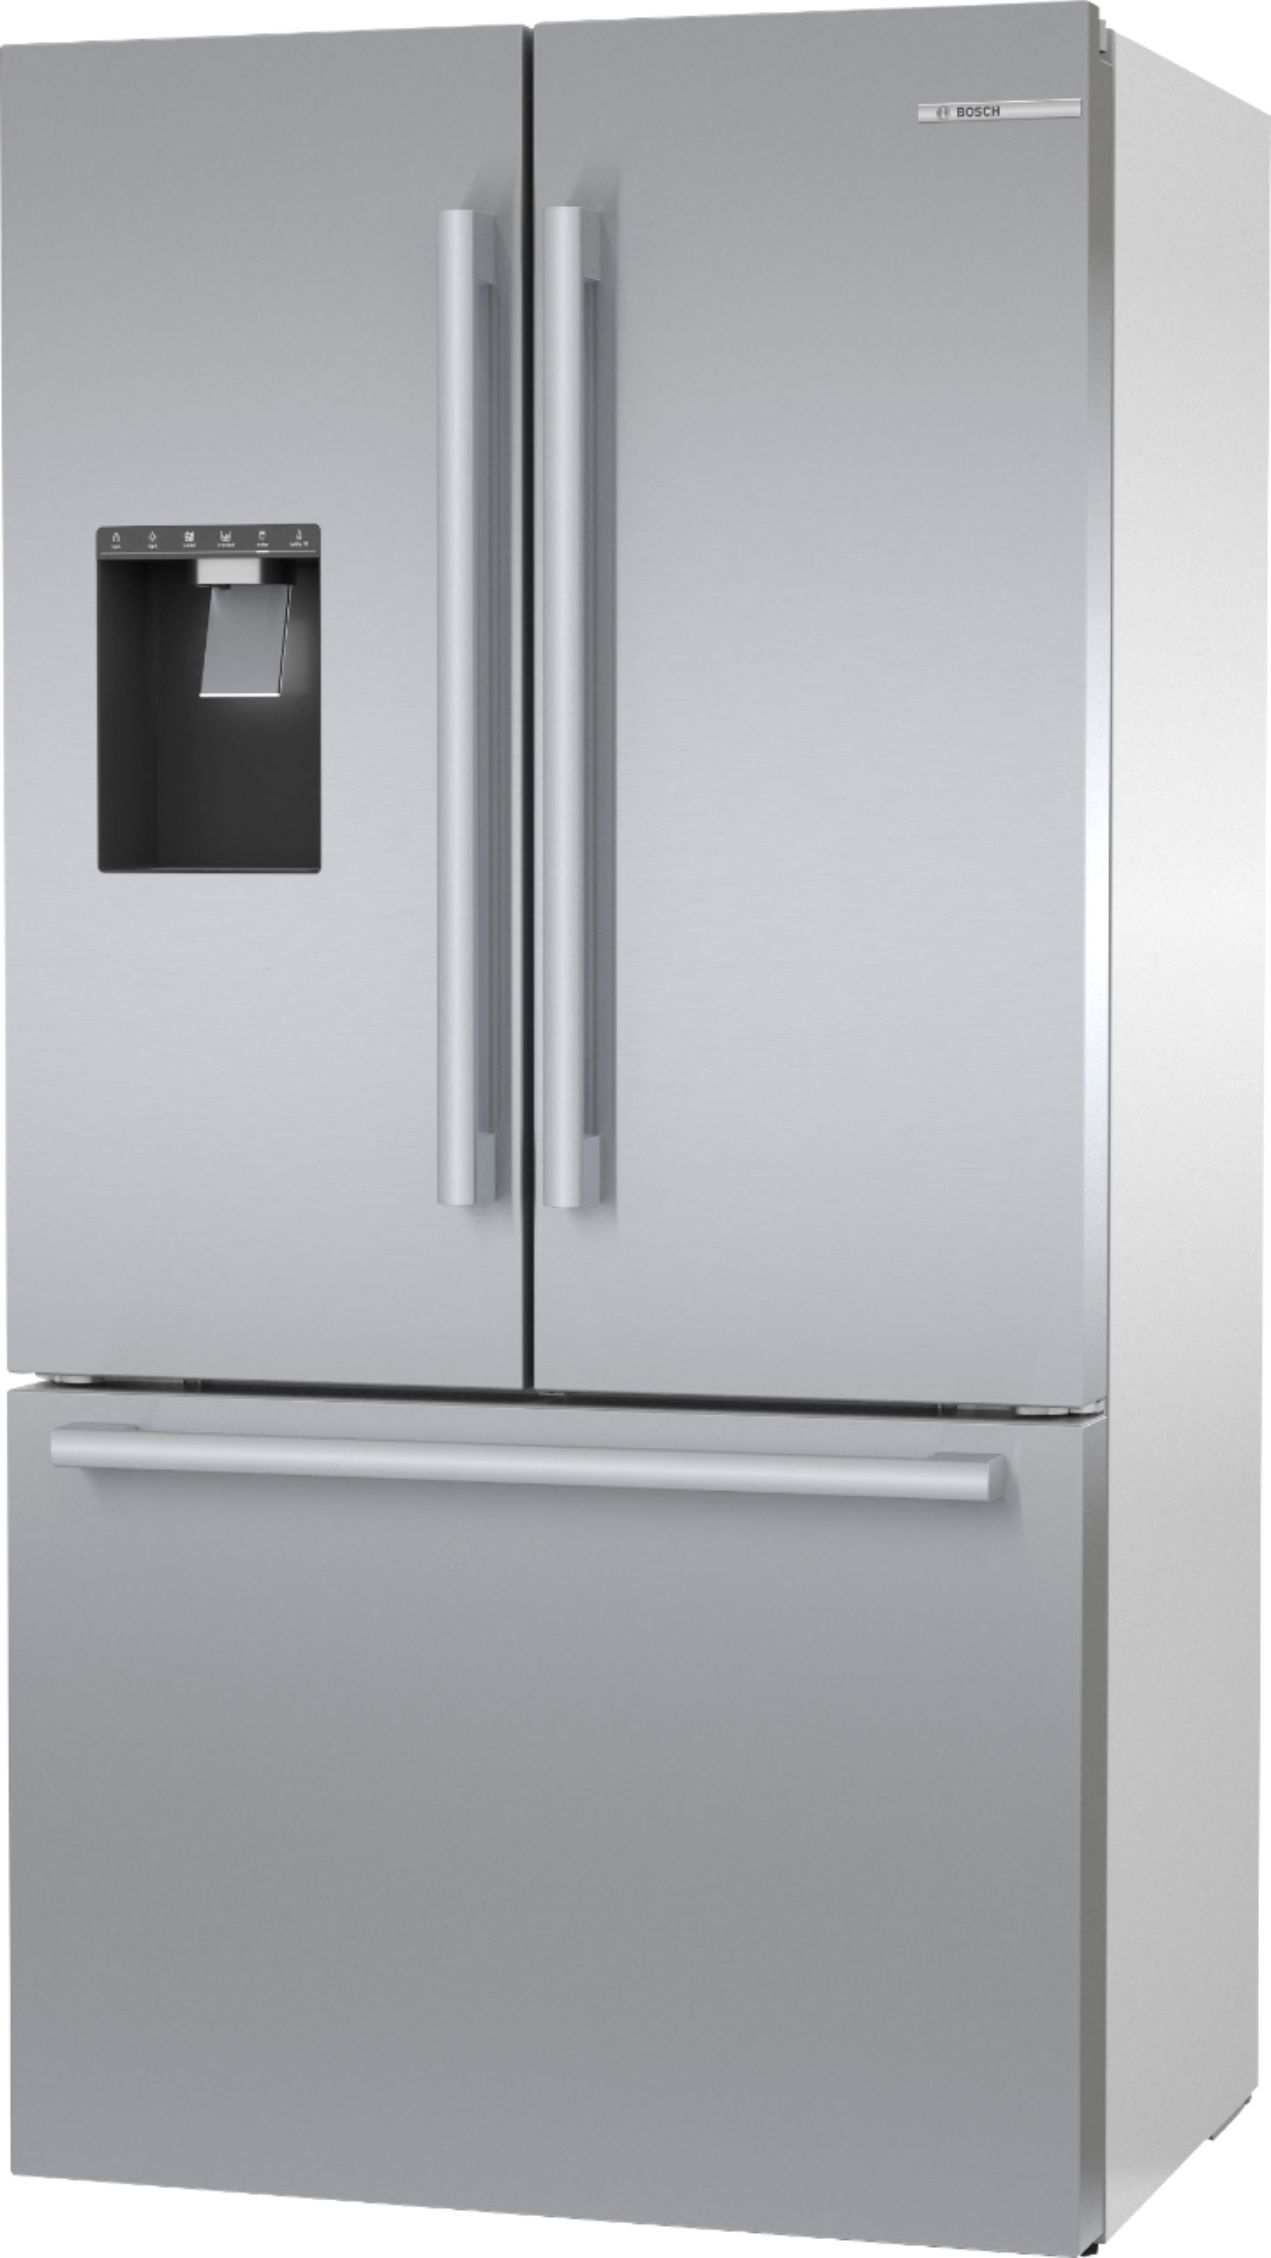 Left View: Bosch - 500 Series 21 Cu. Ft. French Door Counter-Depth Smart Refrigerator with External Water and Ice Maker - Stainless steel